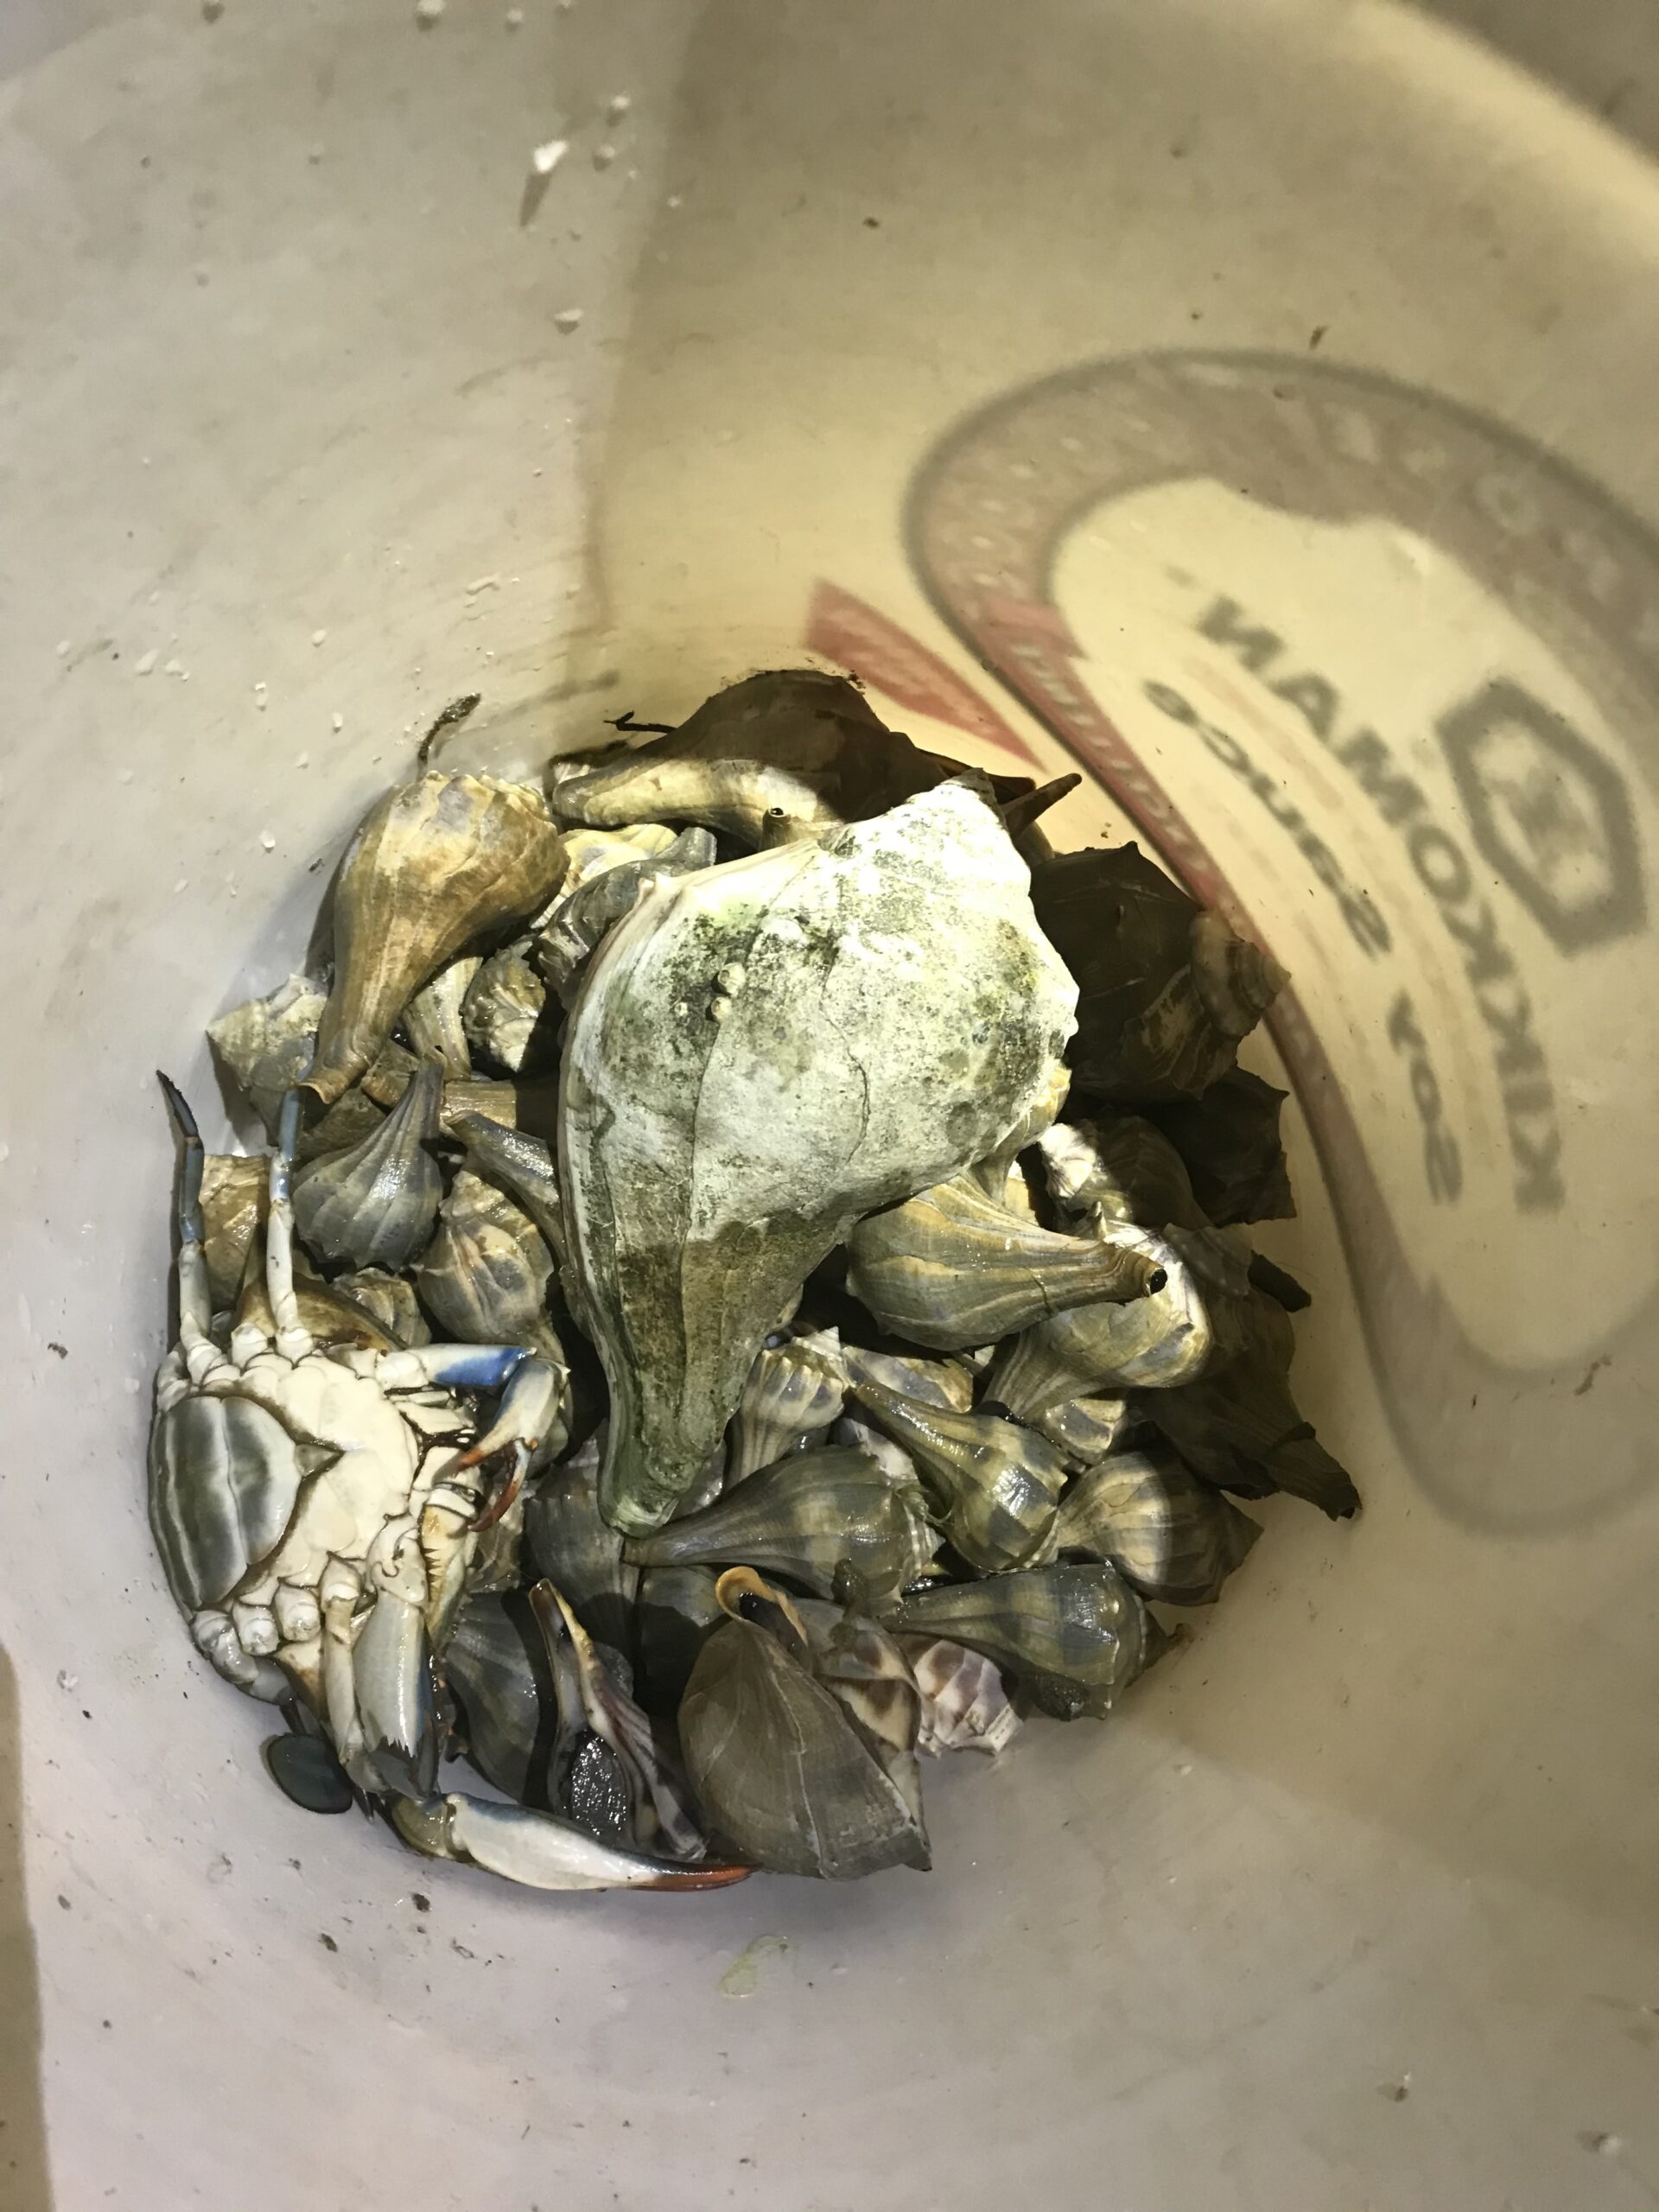 East Hampton Marine Patrol officers caught out-of-town poachers illegally harvesting undersized conch and crabs in Napeague Harbor over the weekend, the latest in a rash of illicit poaching of crabs and shellfish the town has seen in recent years.